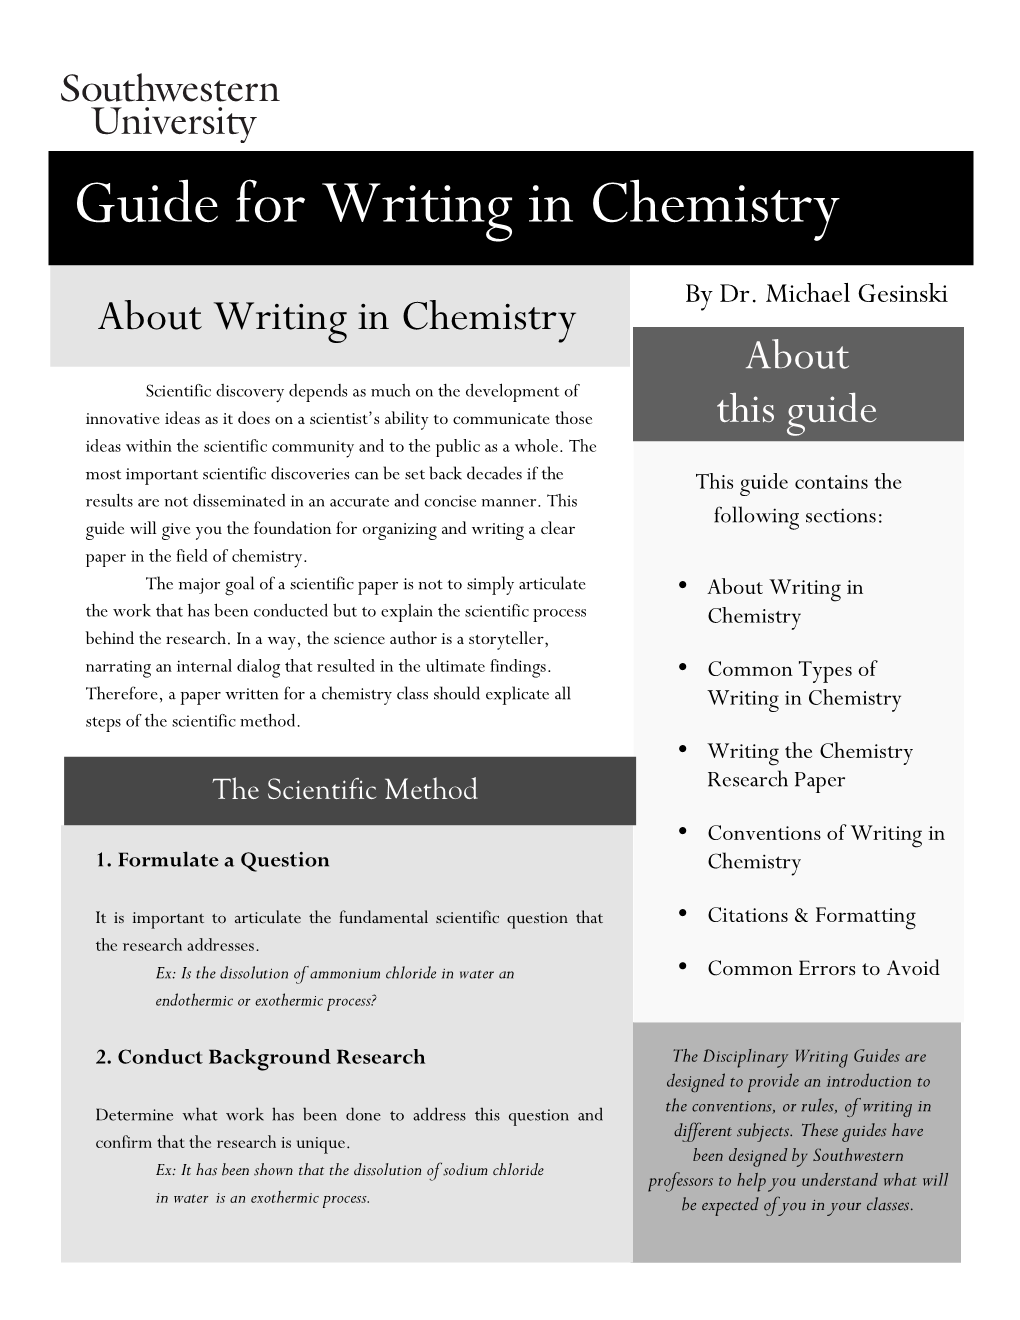 Guide for Writing in Chemistry